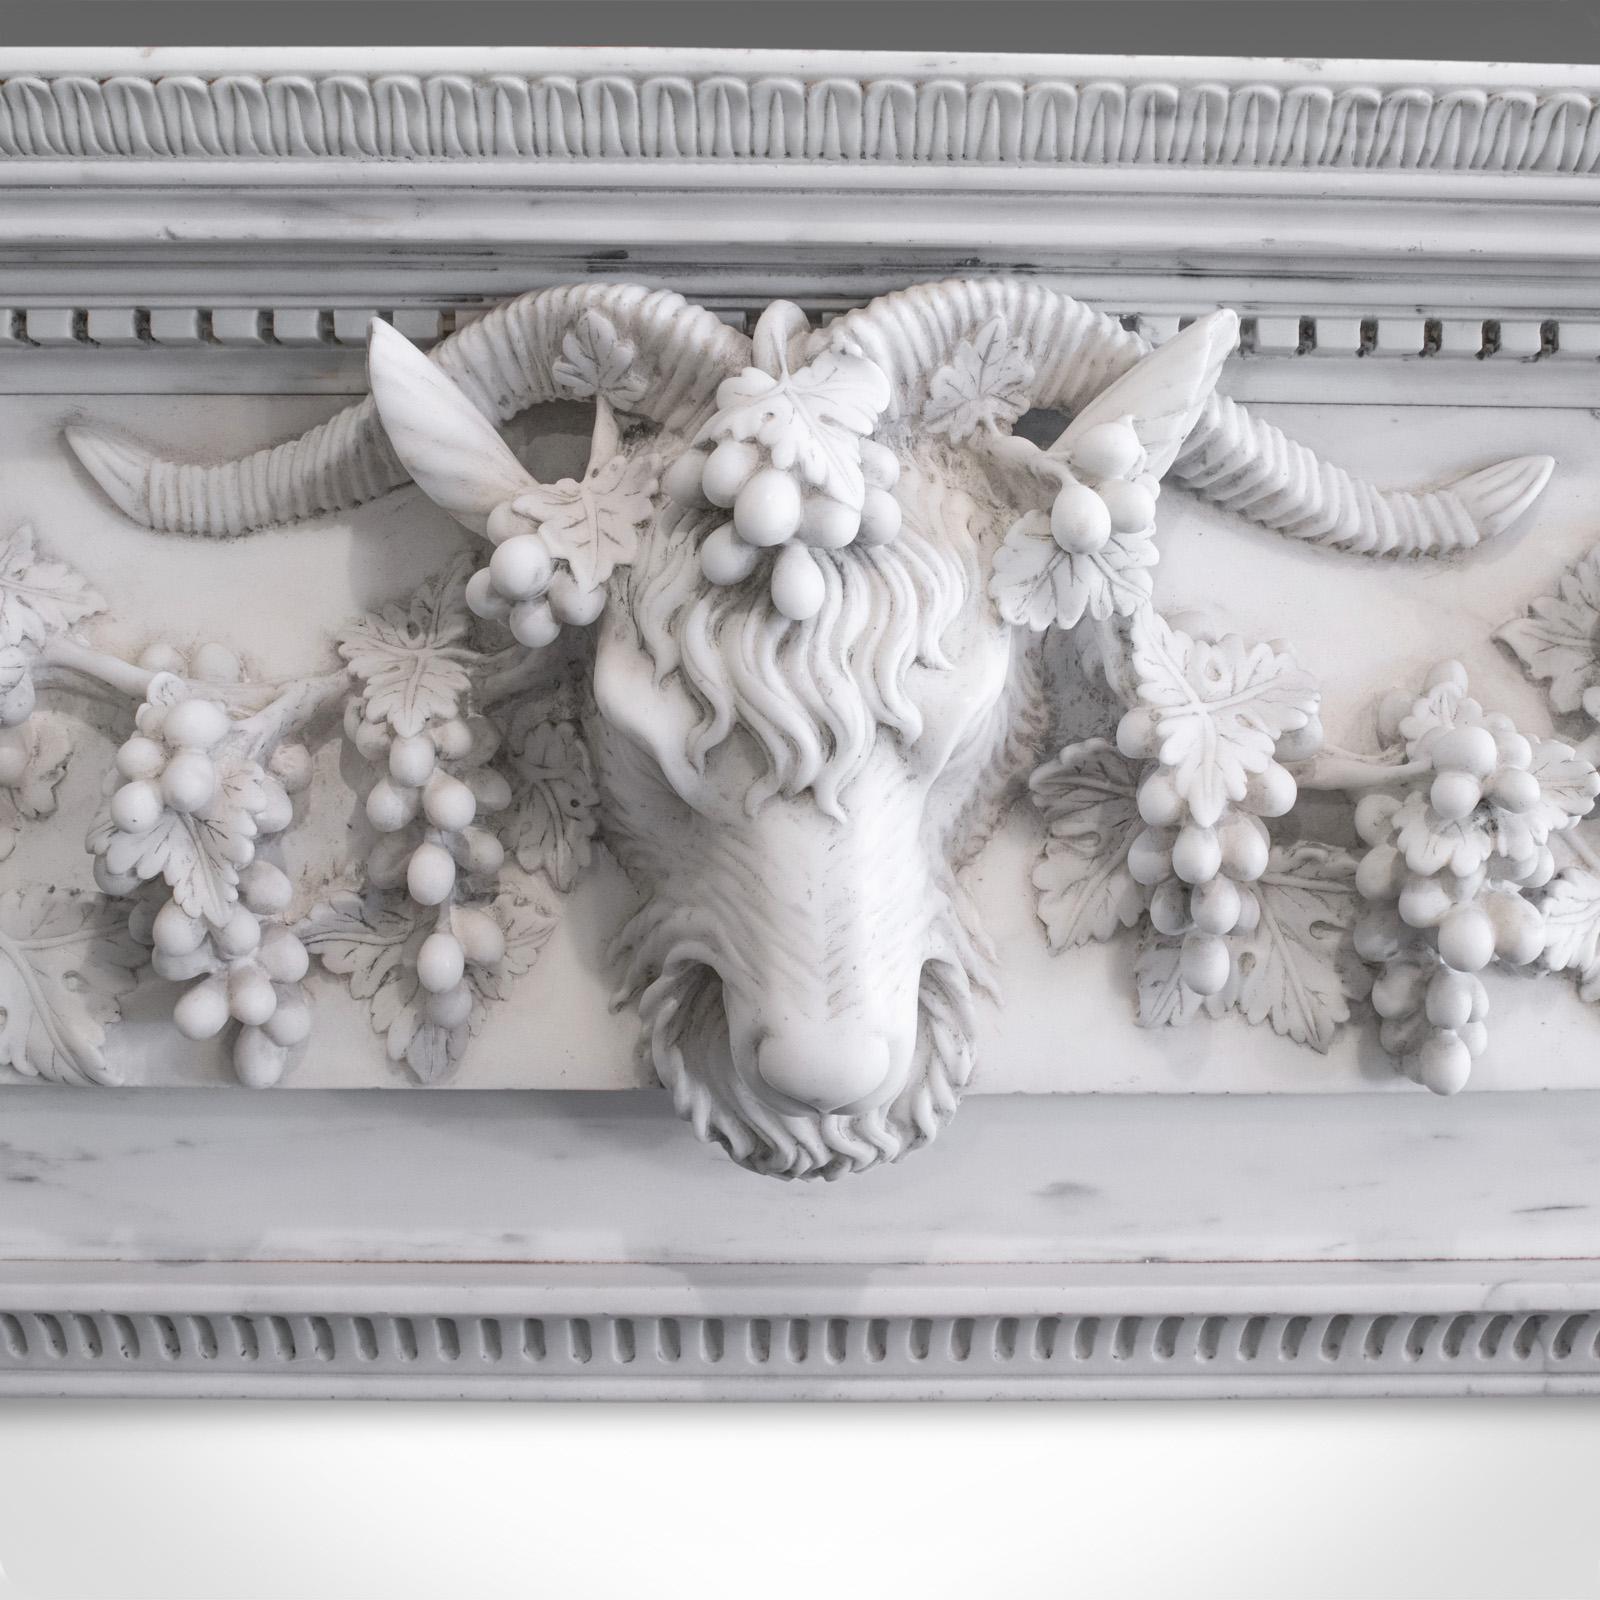 Georgian Revival Marble Fireplace, English, Fire Surround, Dominic Hurley For Sale 1